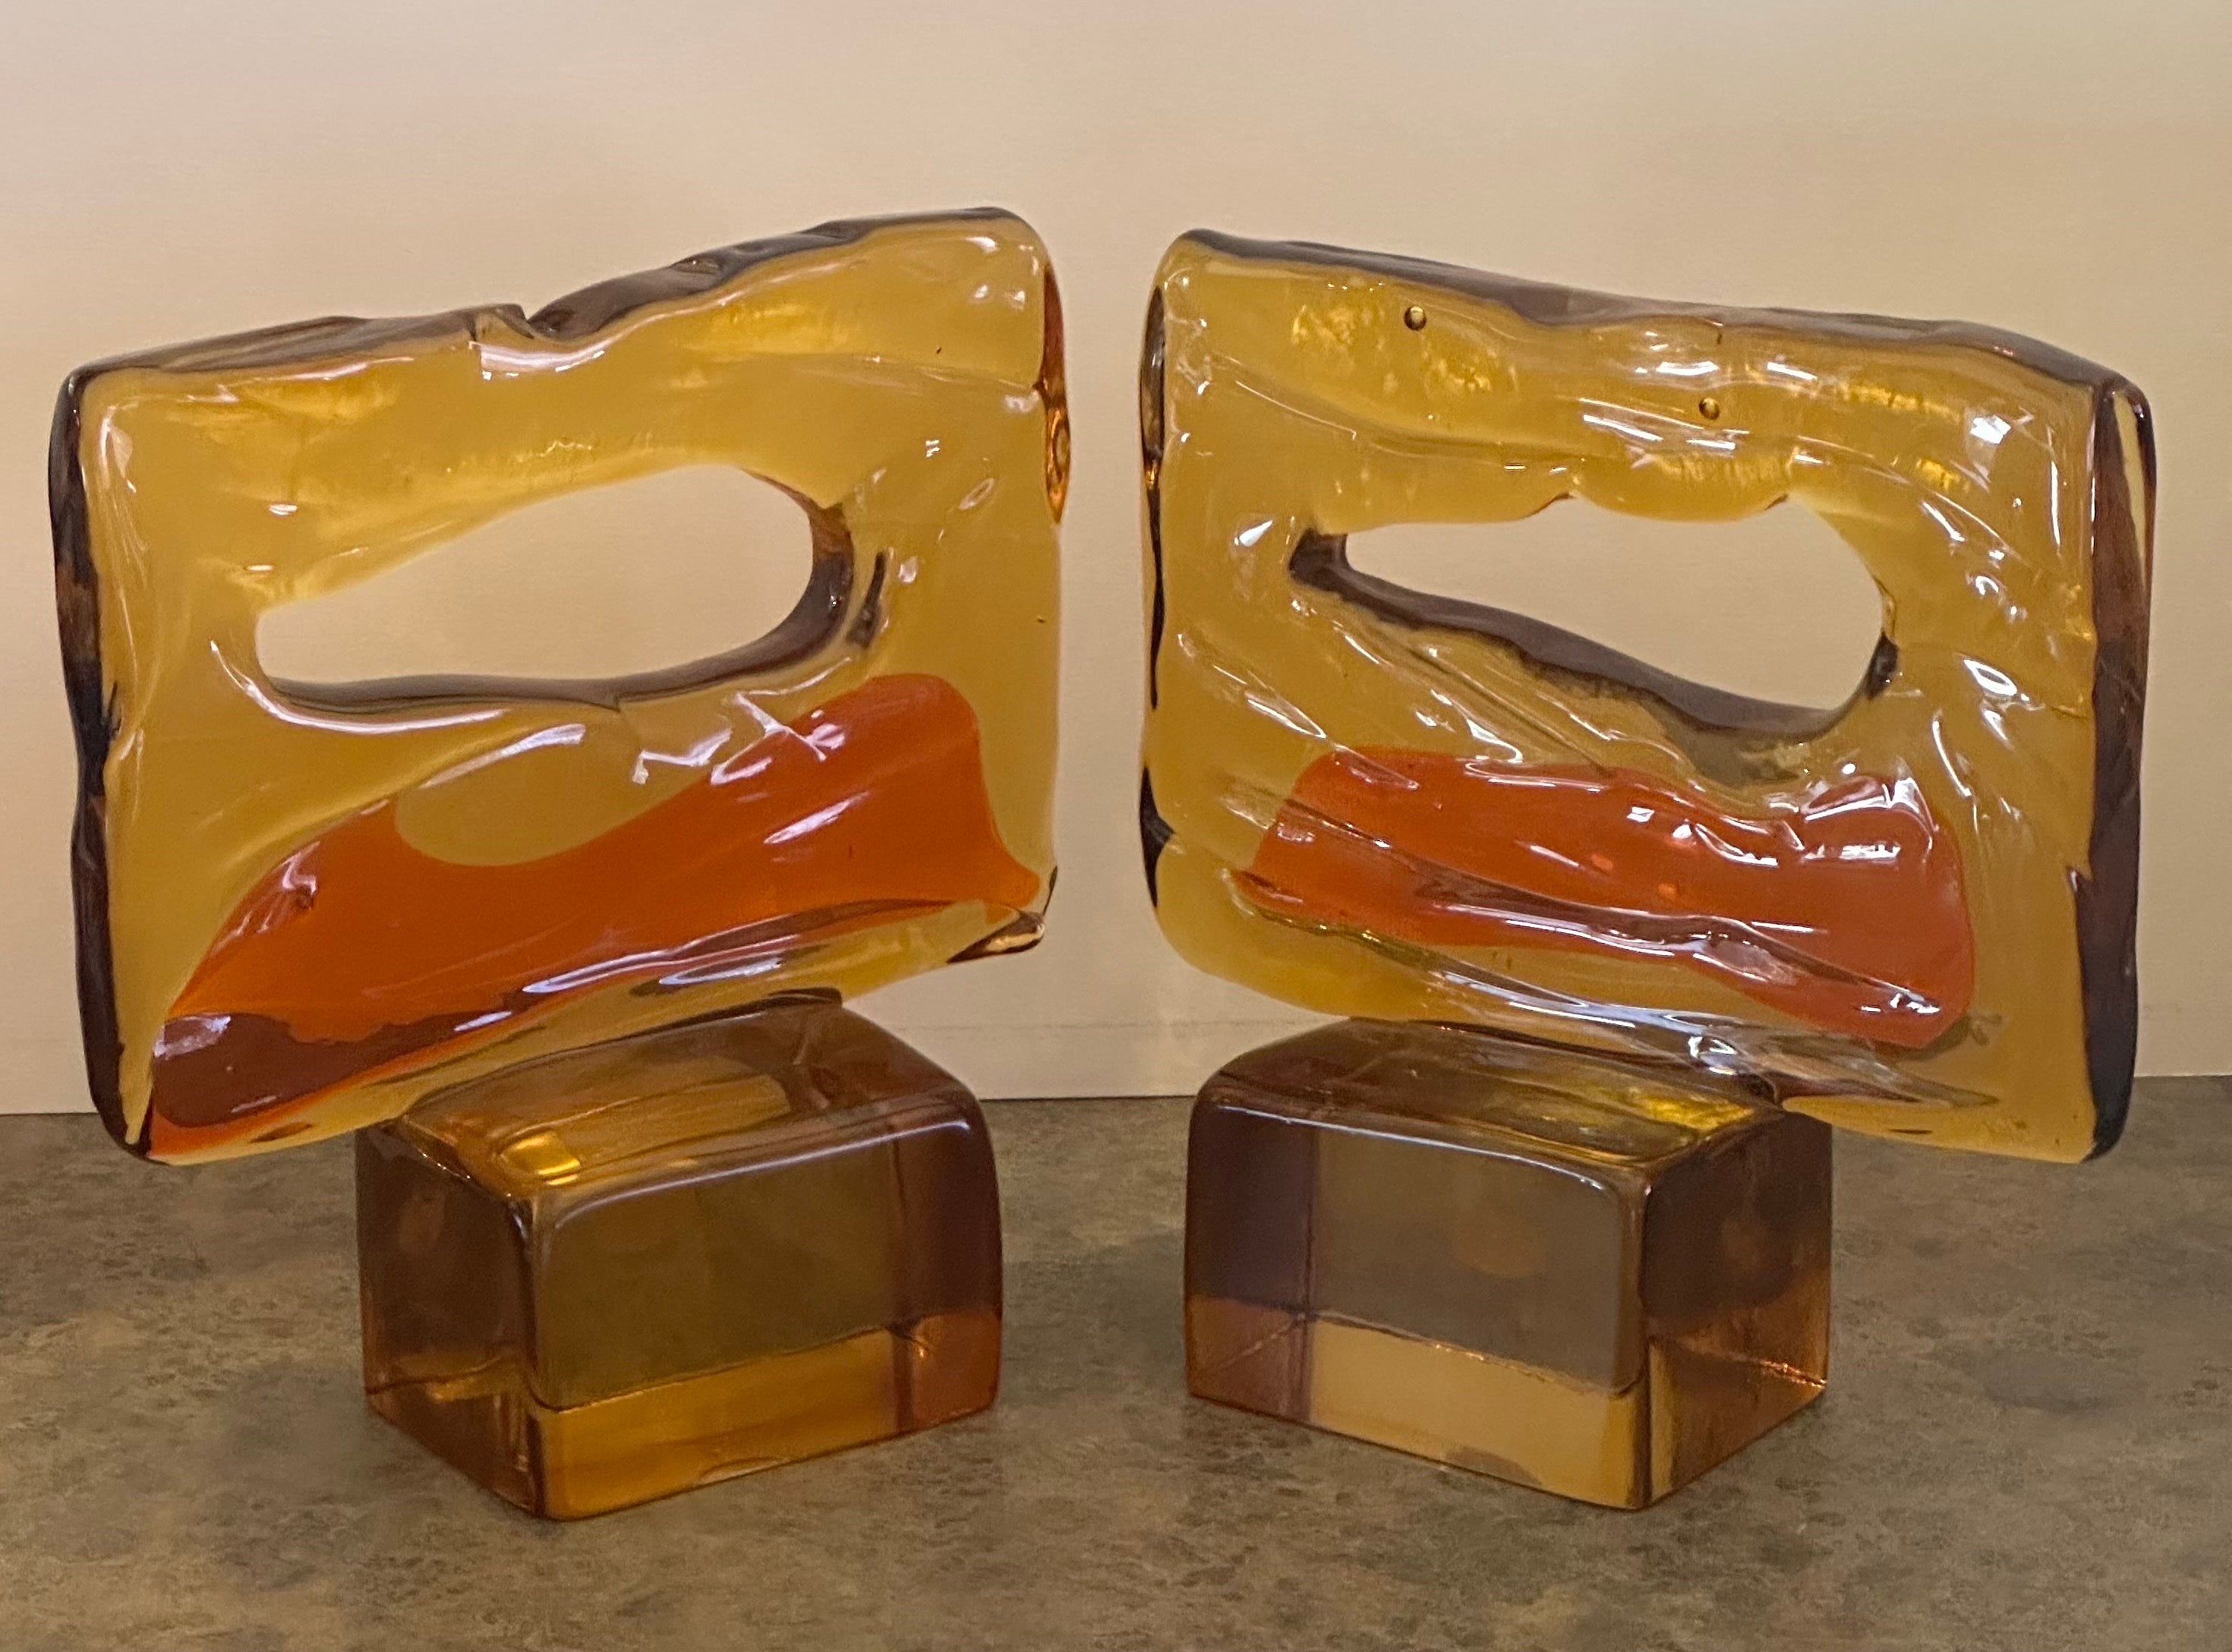 Pair of Large Abstract Sommerso Bookends by Luciano Gaspari for Murano Glass For Sale 2